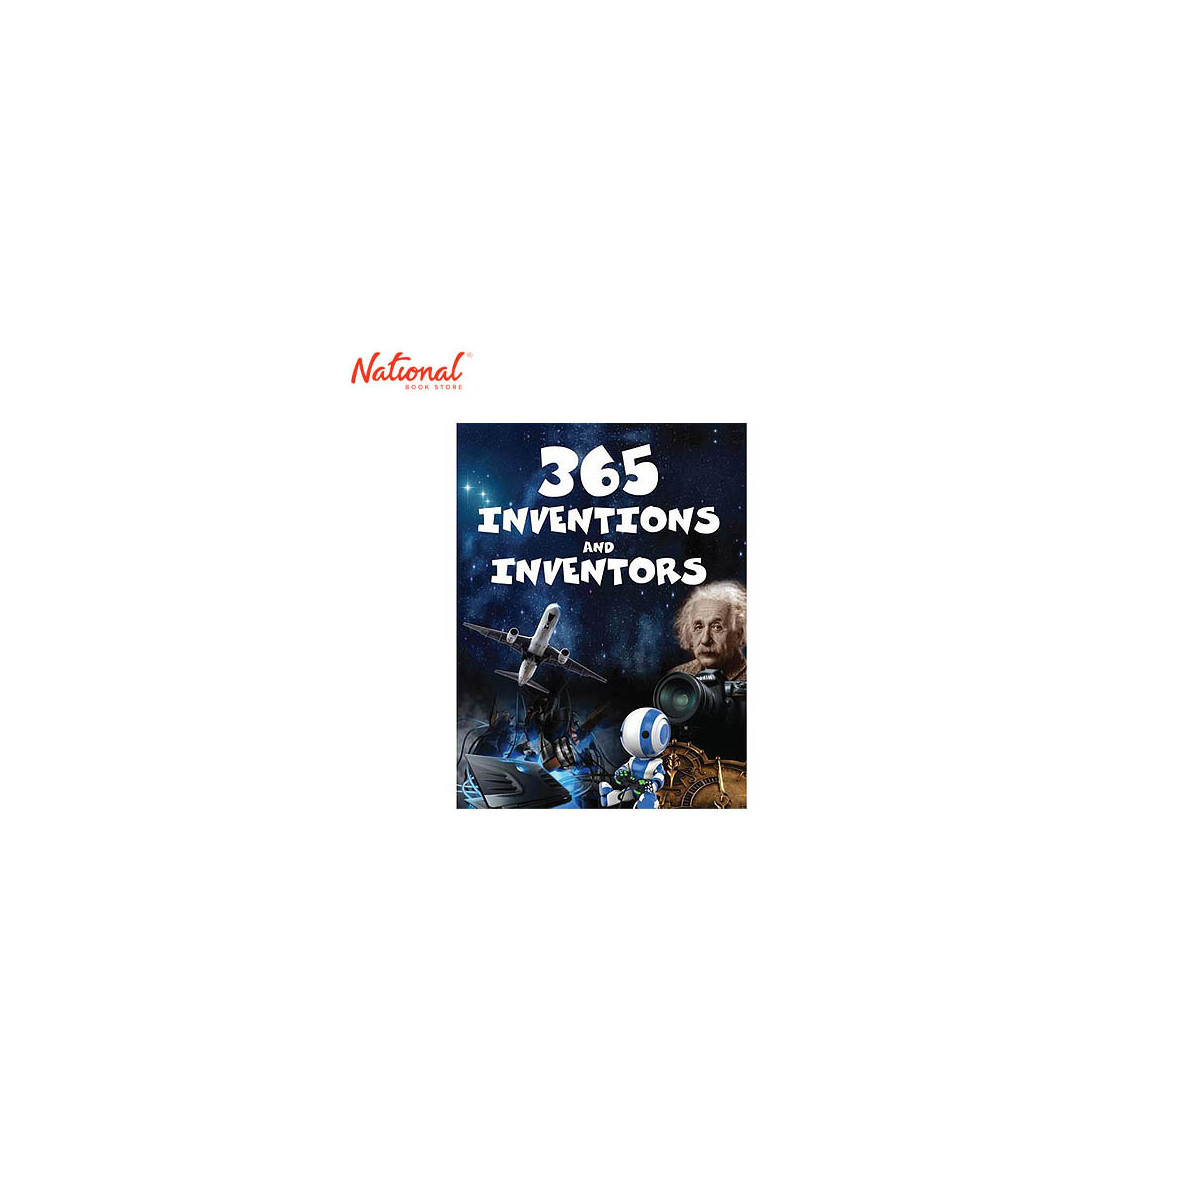 365 Inventions And Inventors Hardcover by Pegasus